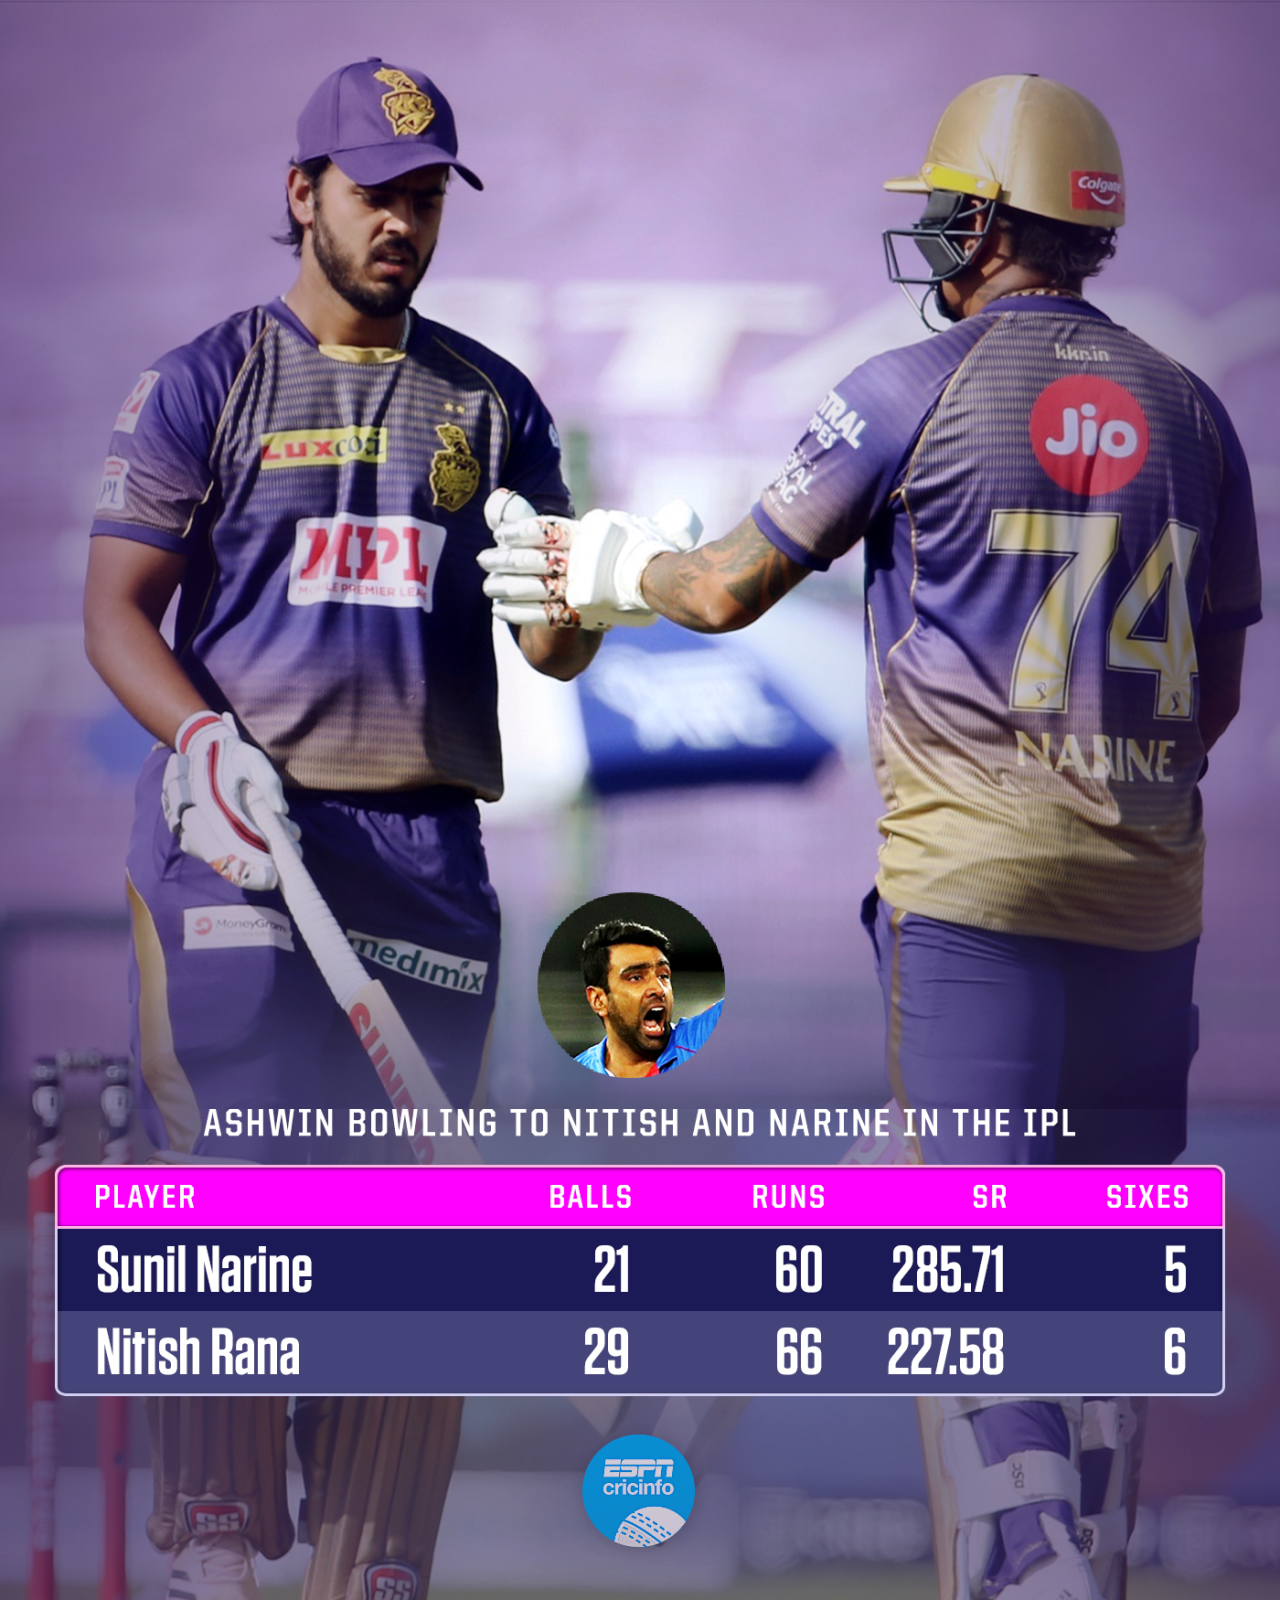 Nitish Rana and Sunil Narine have a dominating record against R Ashwin in the IPL, IPL 2020, Abu Dhabi, October 24, 2020